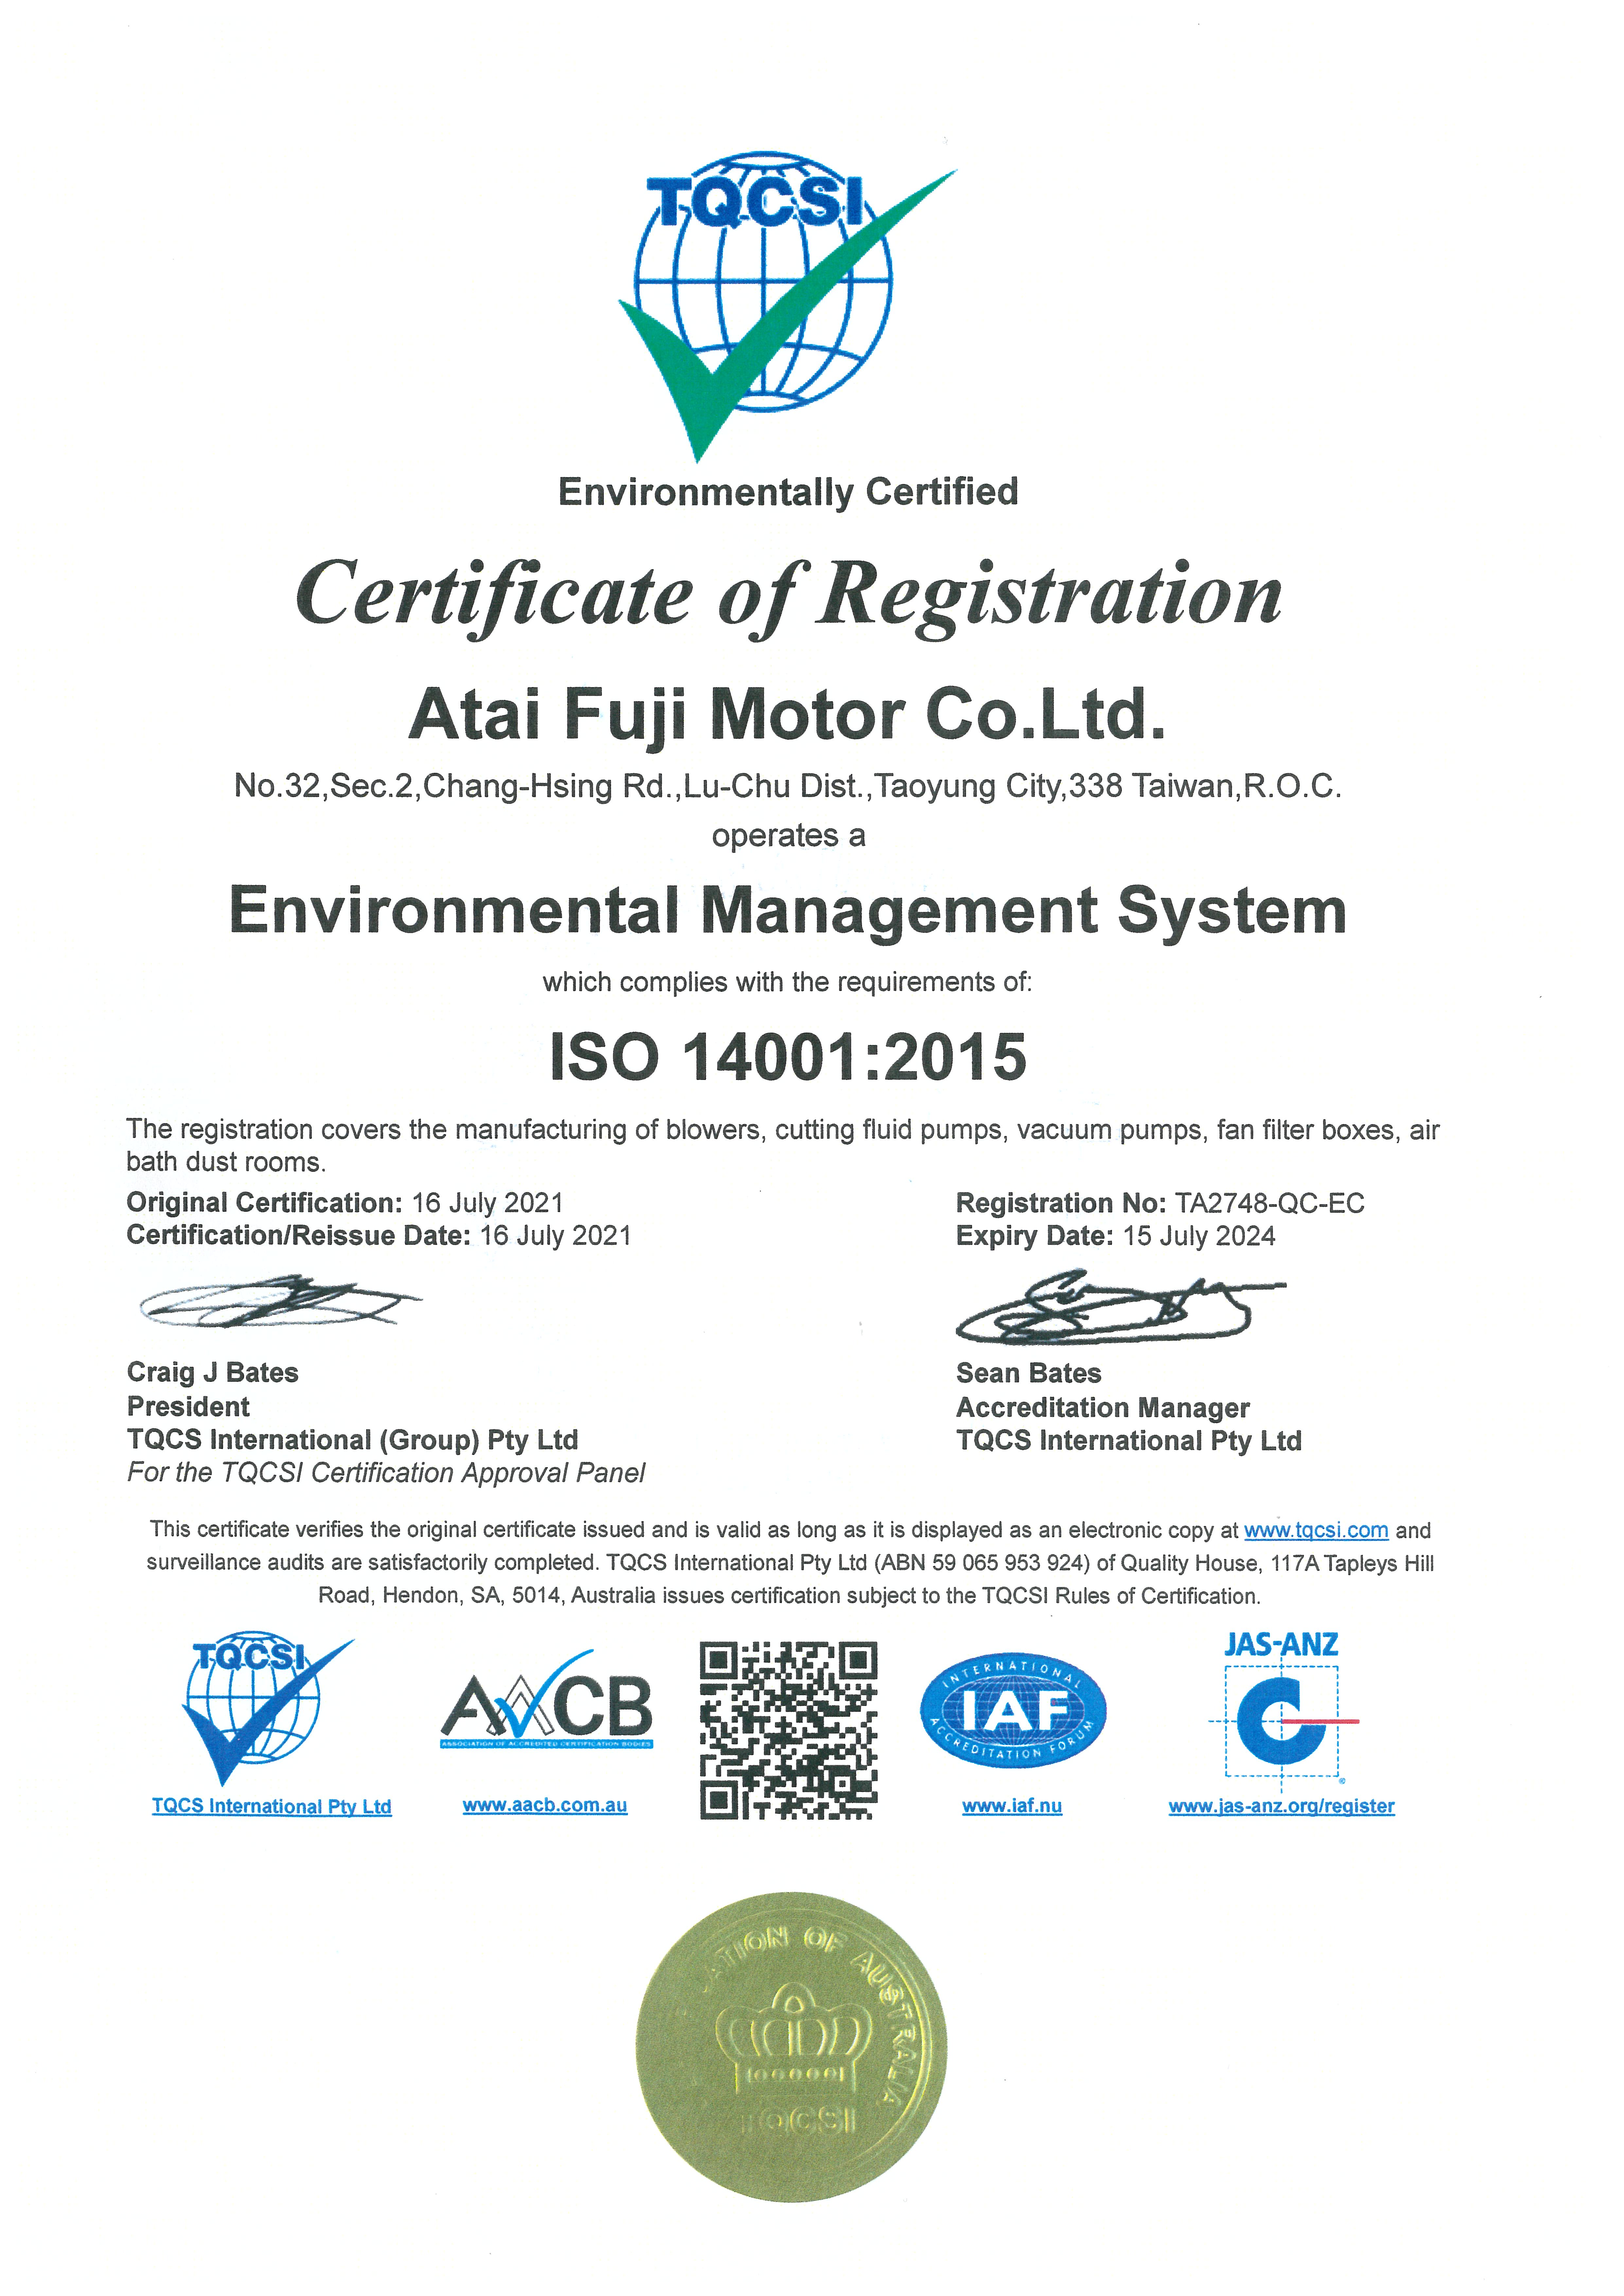 ISO 14001_2015品質管理系統(Quality Management Systems)